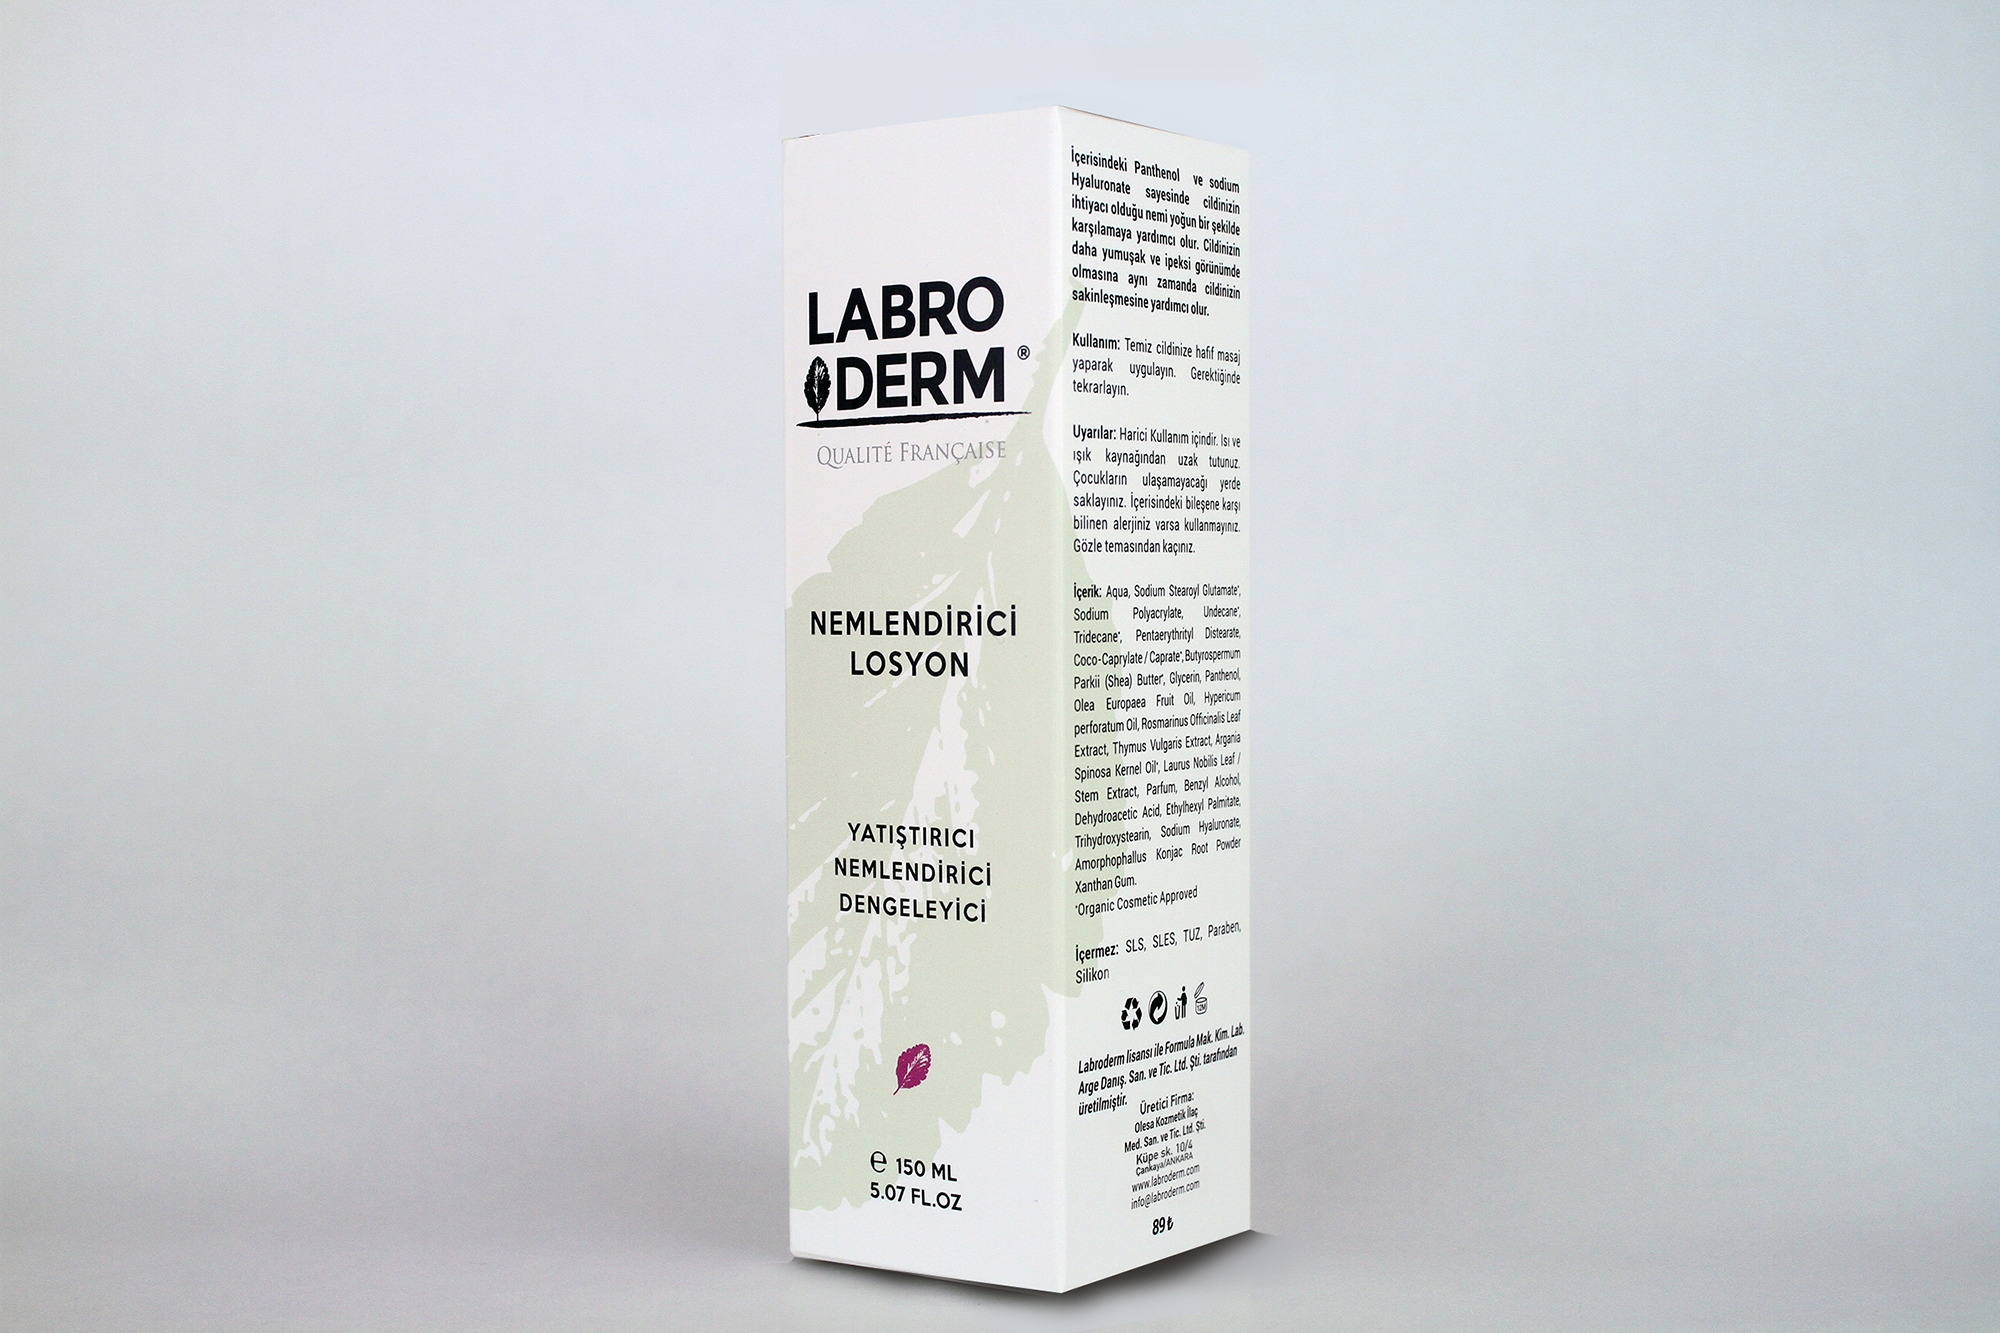 Labroderm Packaging